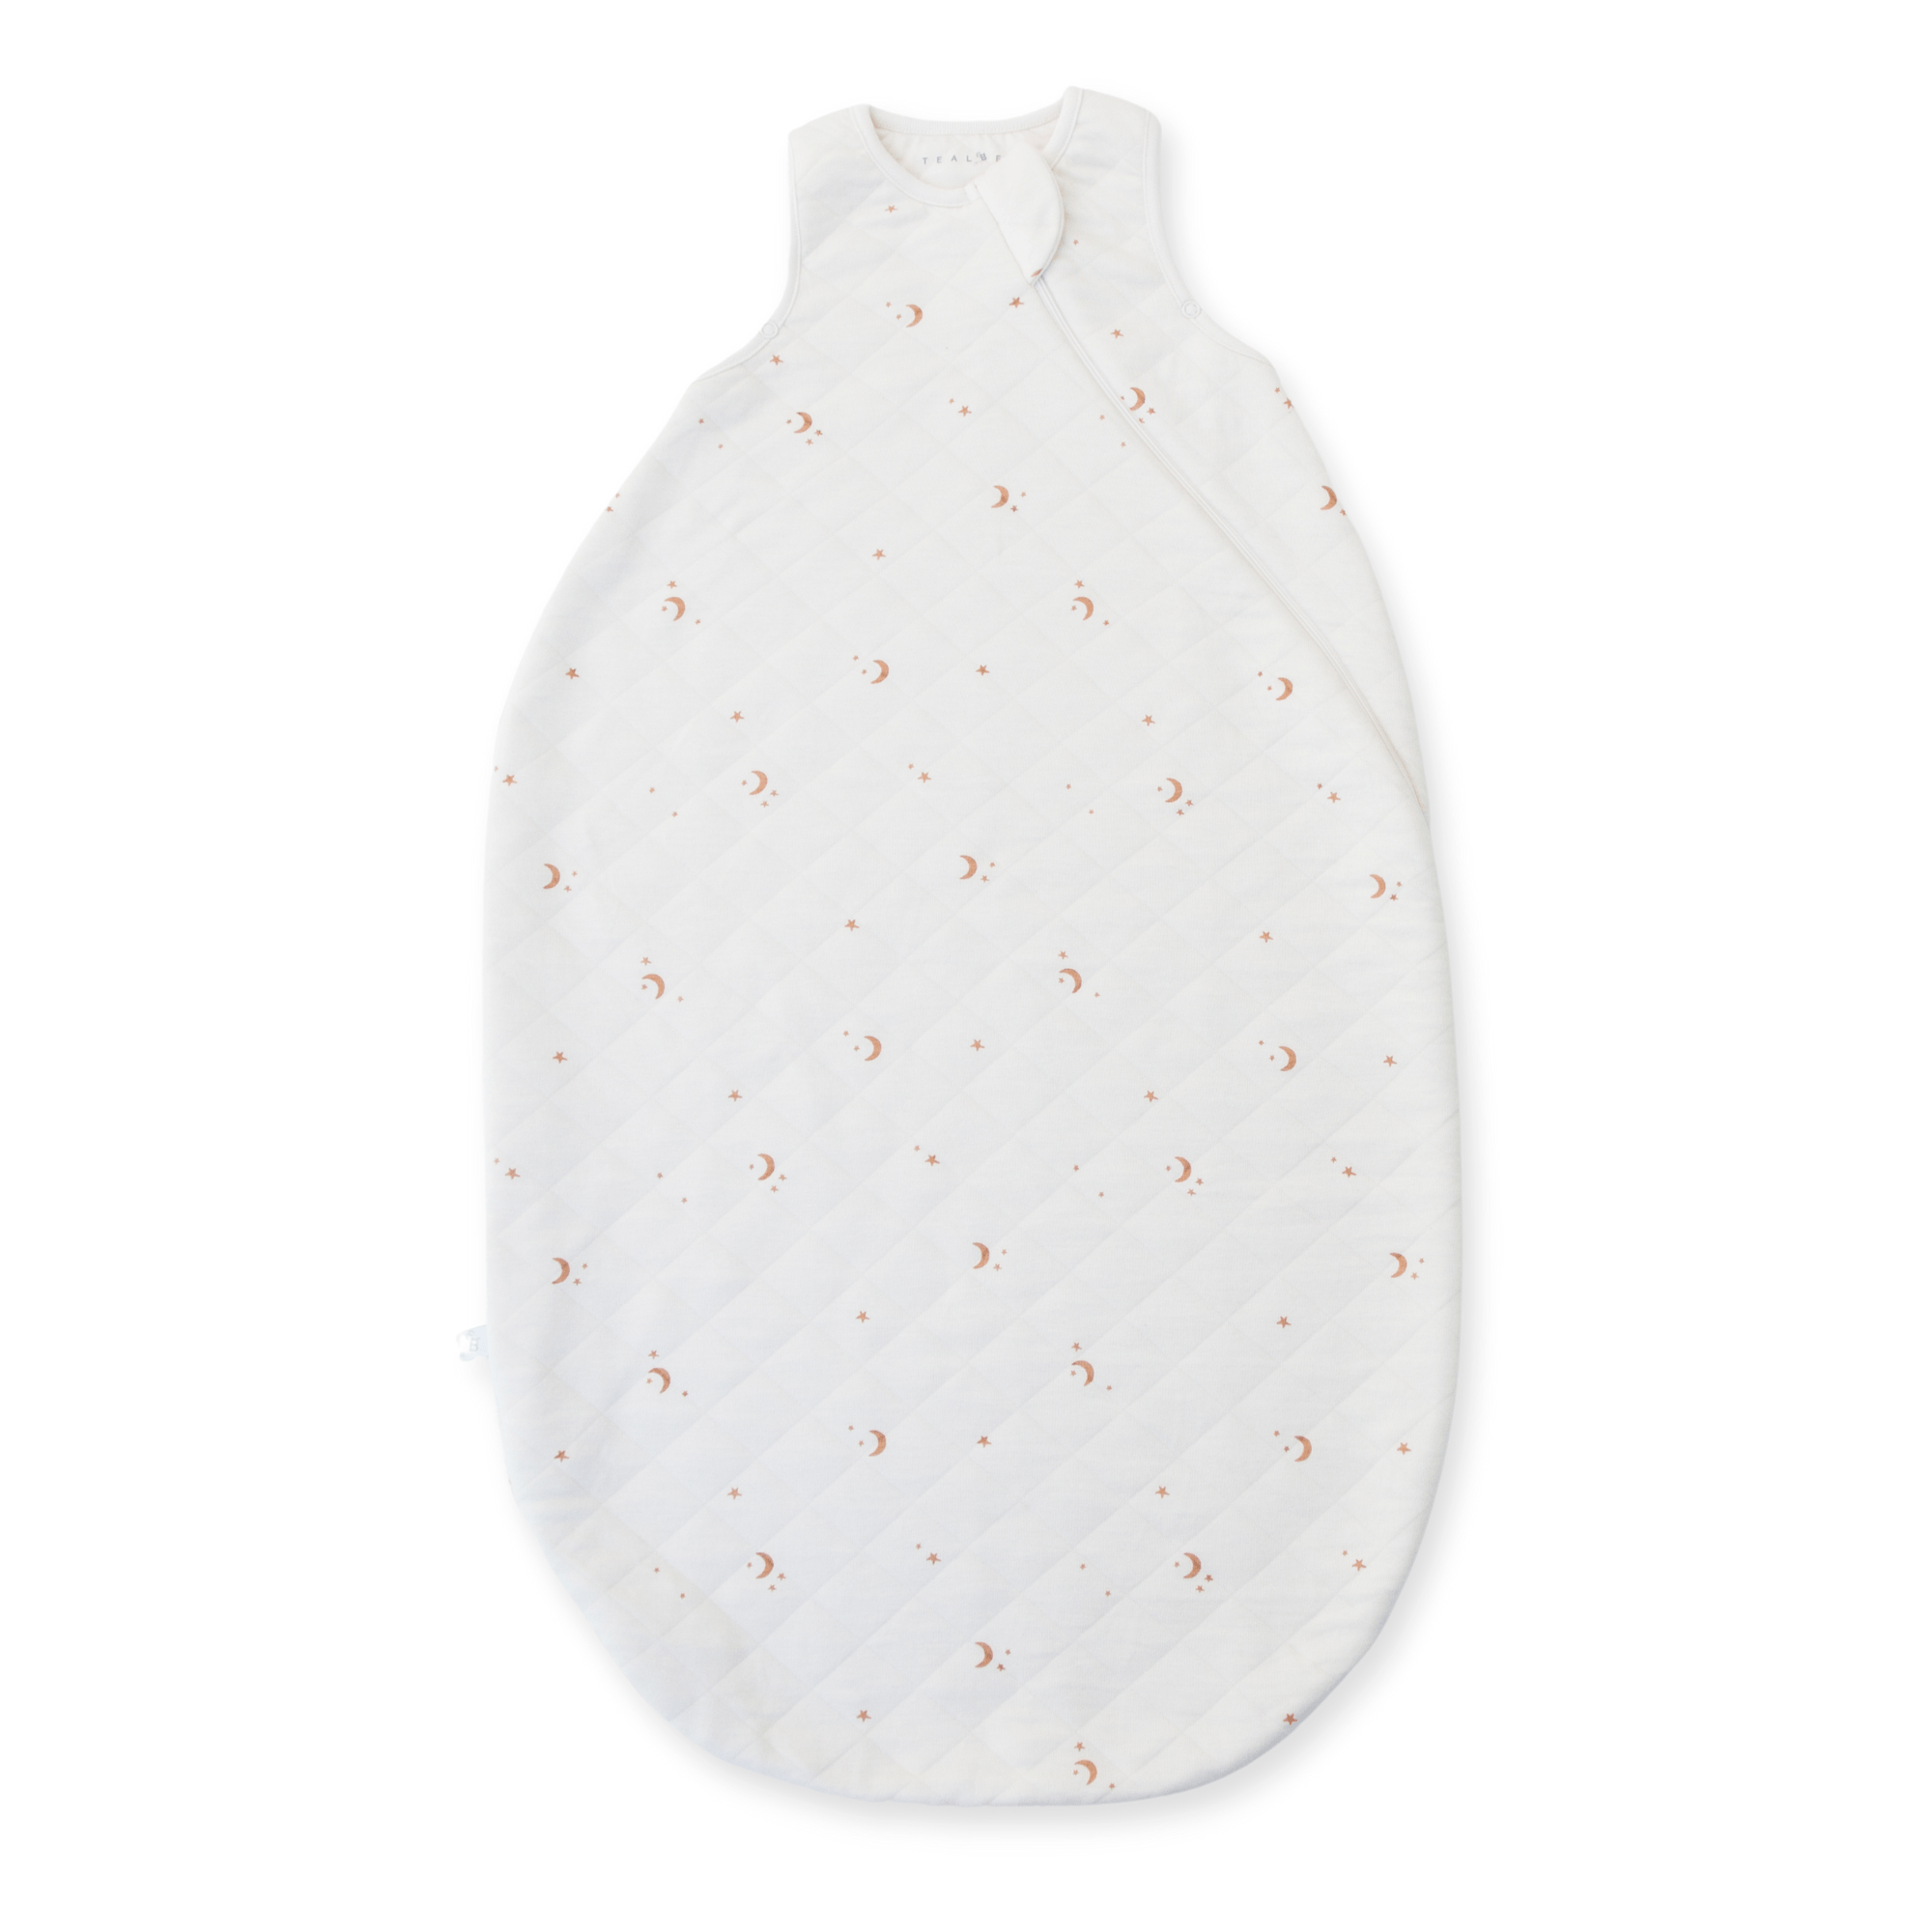 Tealbee Dreambag Moons and Stars fits 6m to 24m - product flatlay view